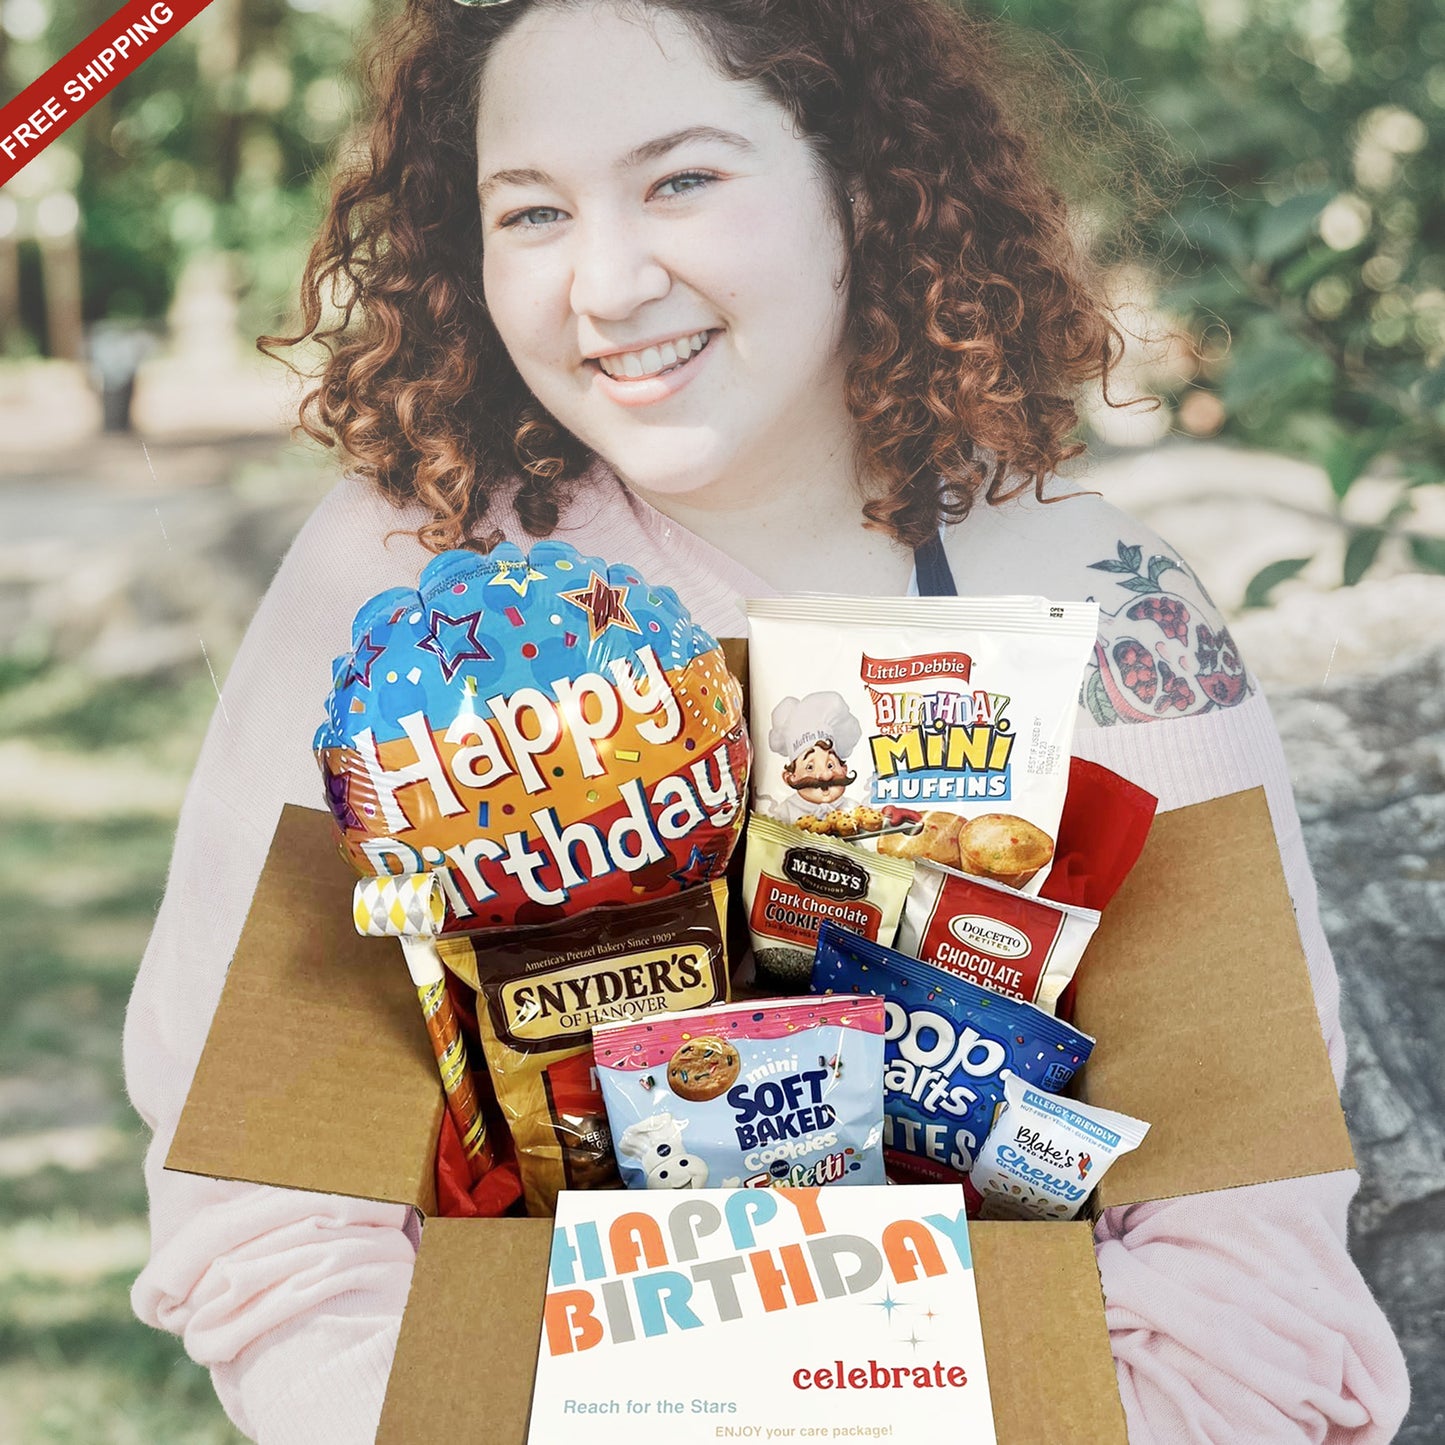 Birthday Care Package with Cookies, Snacks and Happy Birthday Balloon for All Ages Unisex Birthday Gift Set for Her and for Him on their Birthday